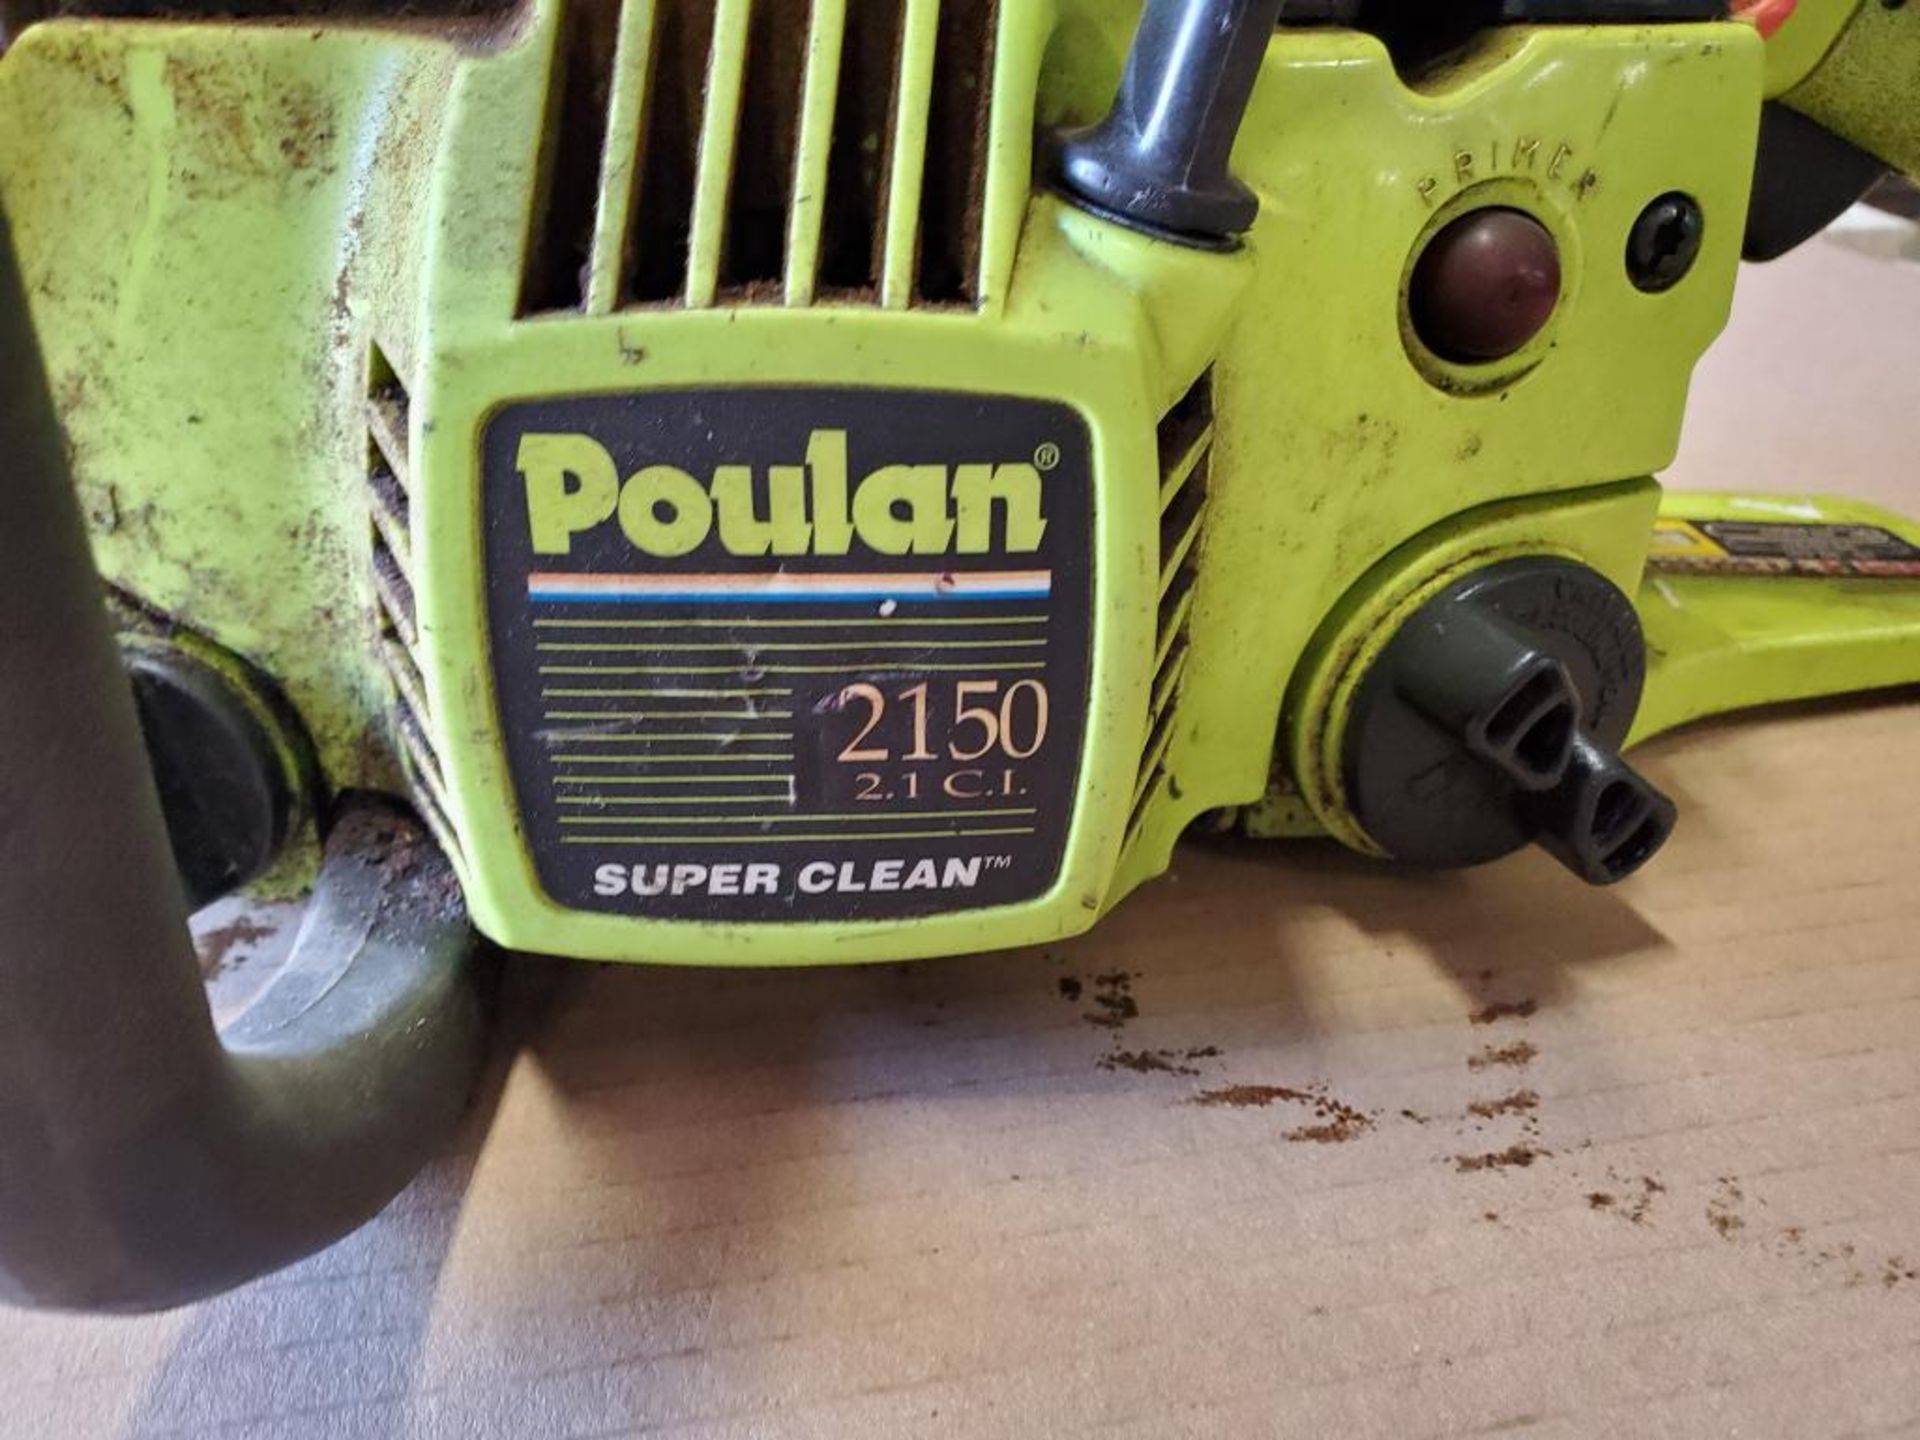 Poulan 2150 2.1CL super clean chainsaw. - Image 3 of 12